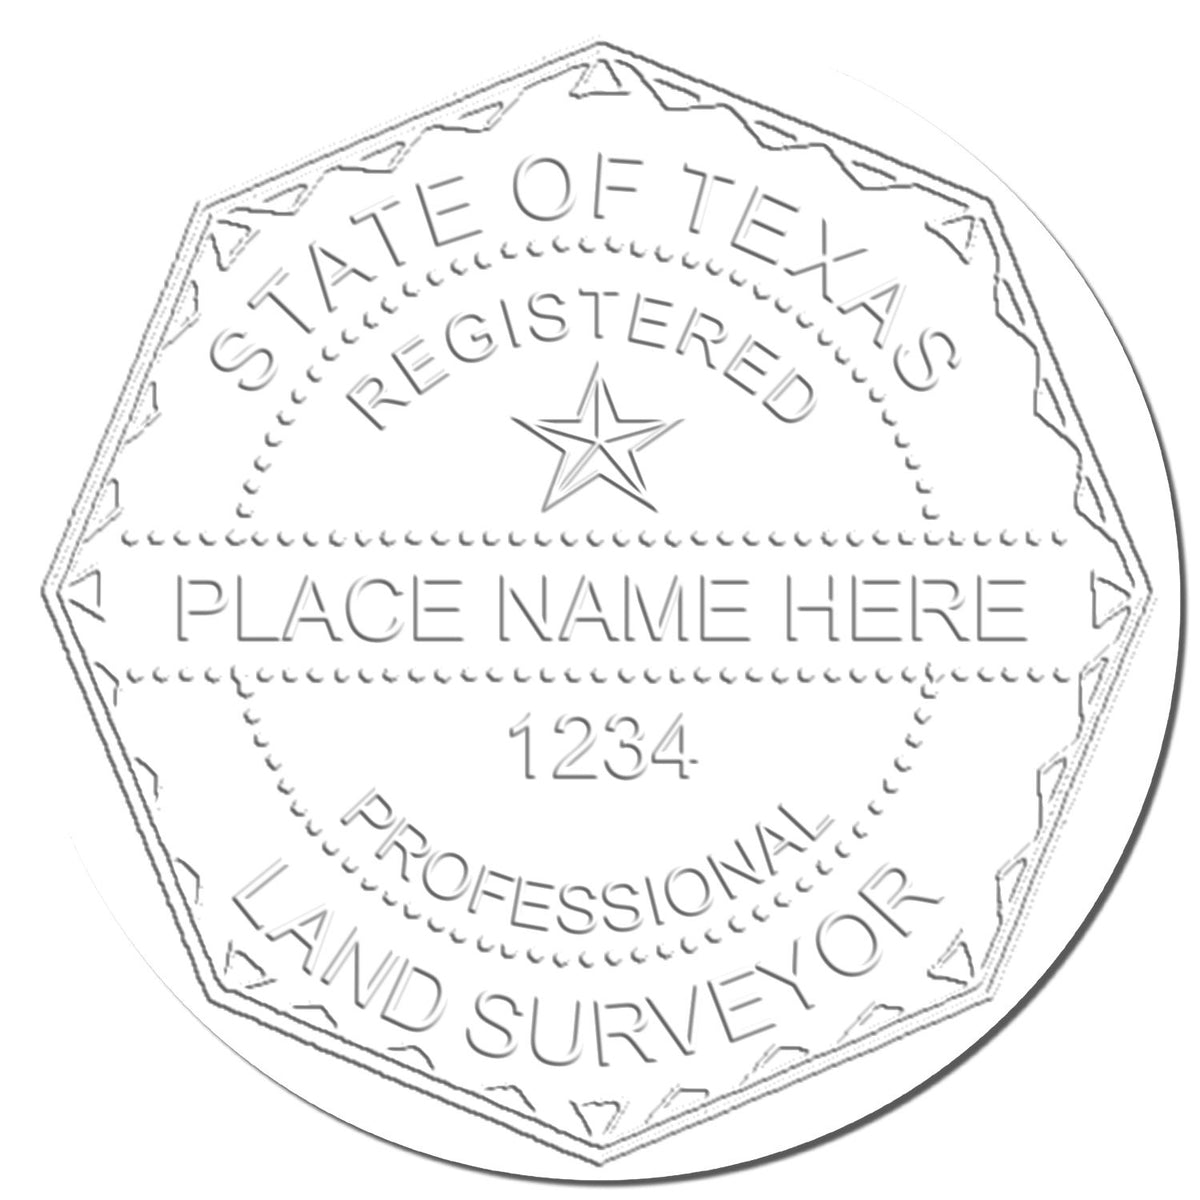 This paper is stamped with a sample imprint of the Gift Texas Land Surveyor Seal, signifying its quality and reliability.